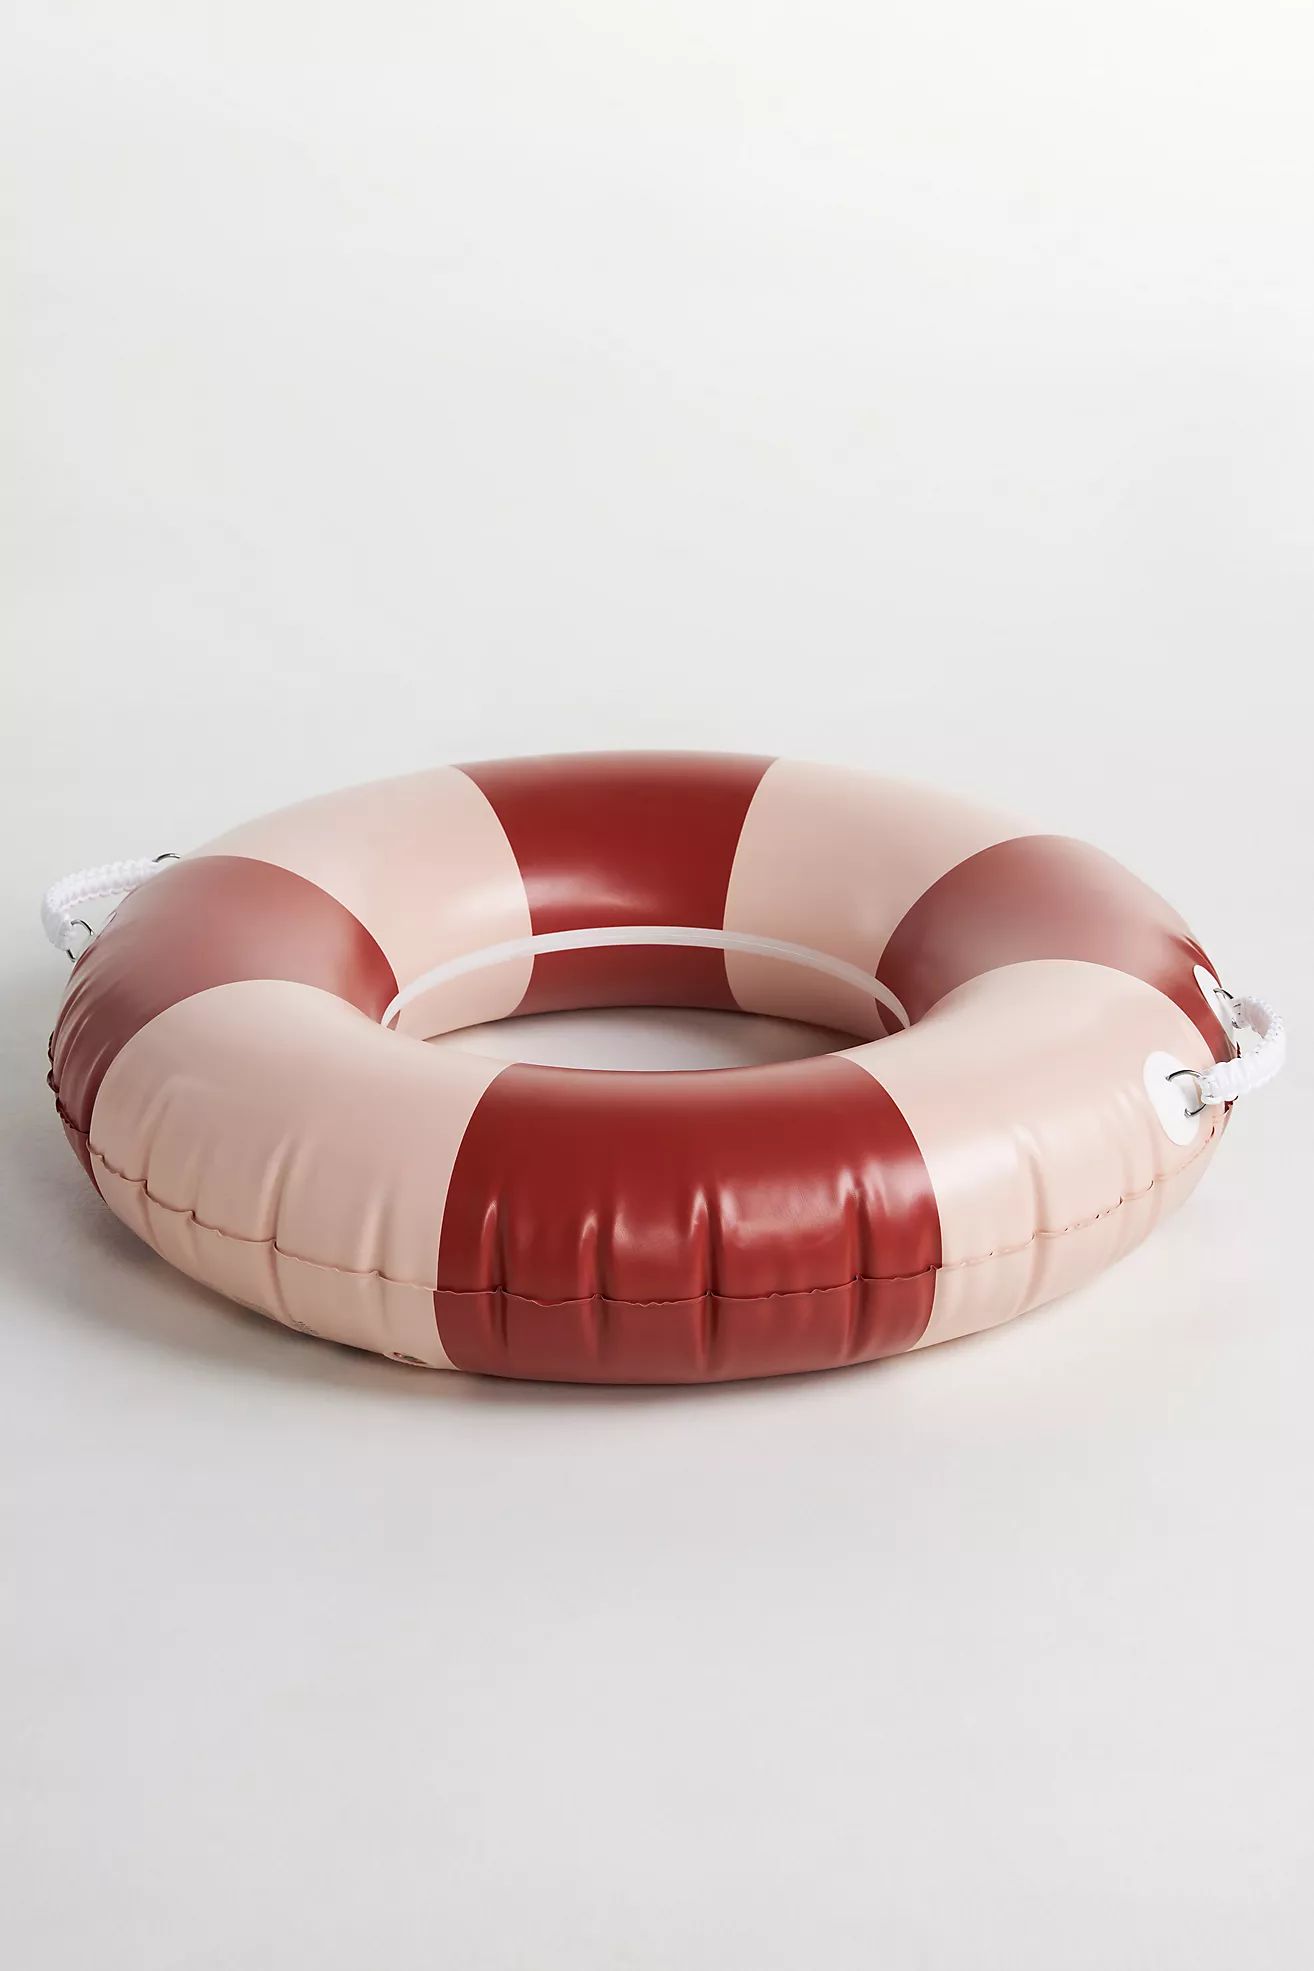 Business & Pleasure Co. The Classic Pool Float | Anthropologie (US)